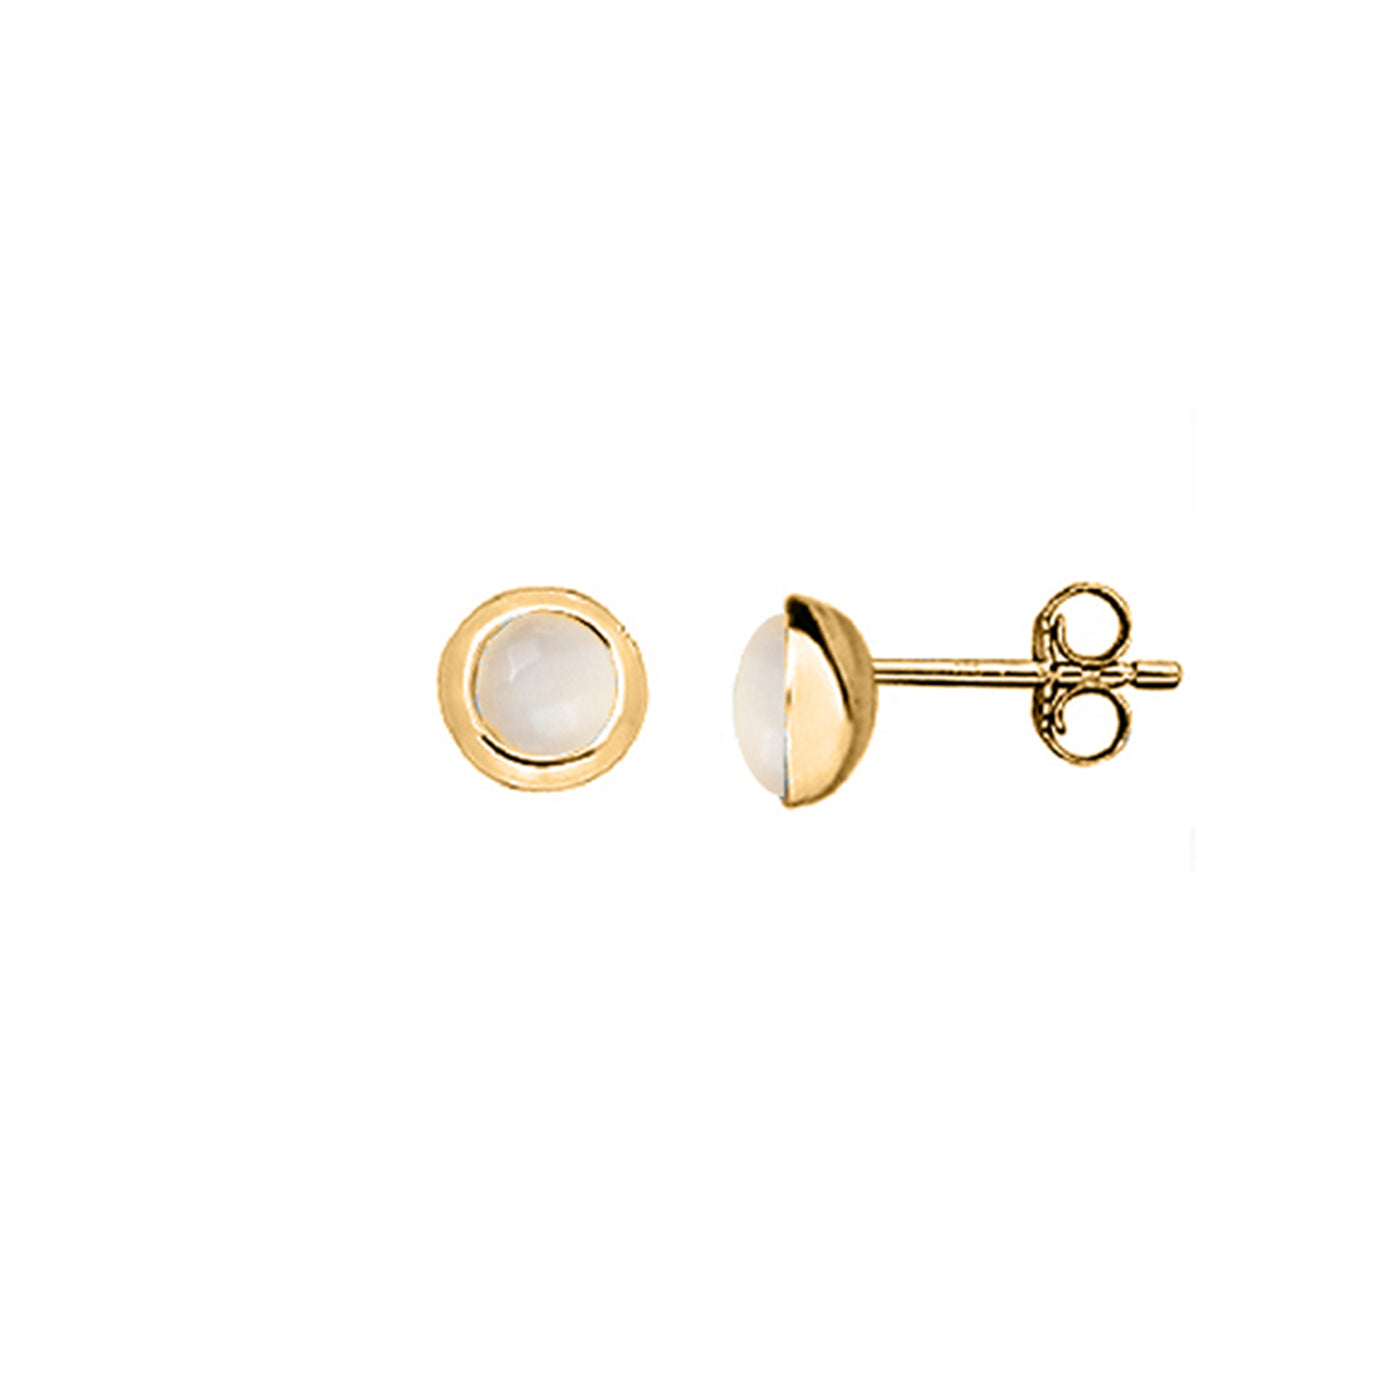 Image of Gold and Moonstone Stud Earrings